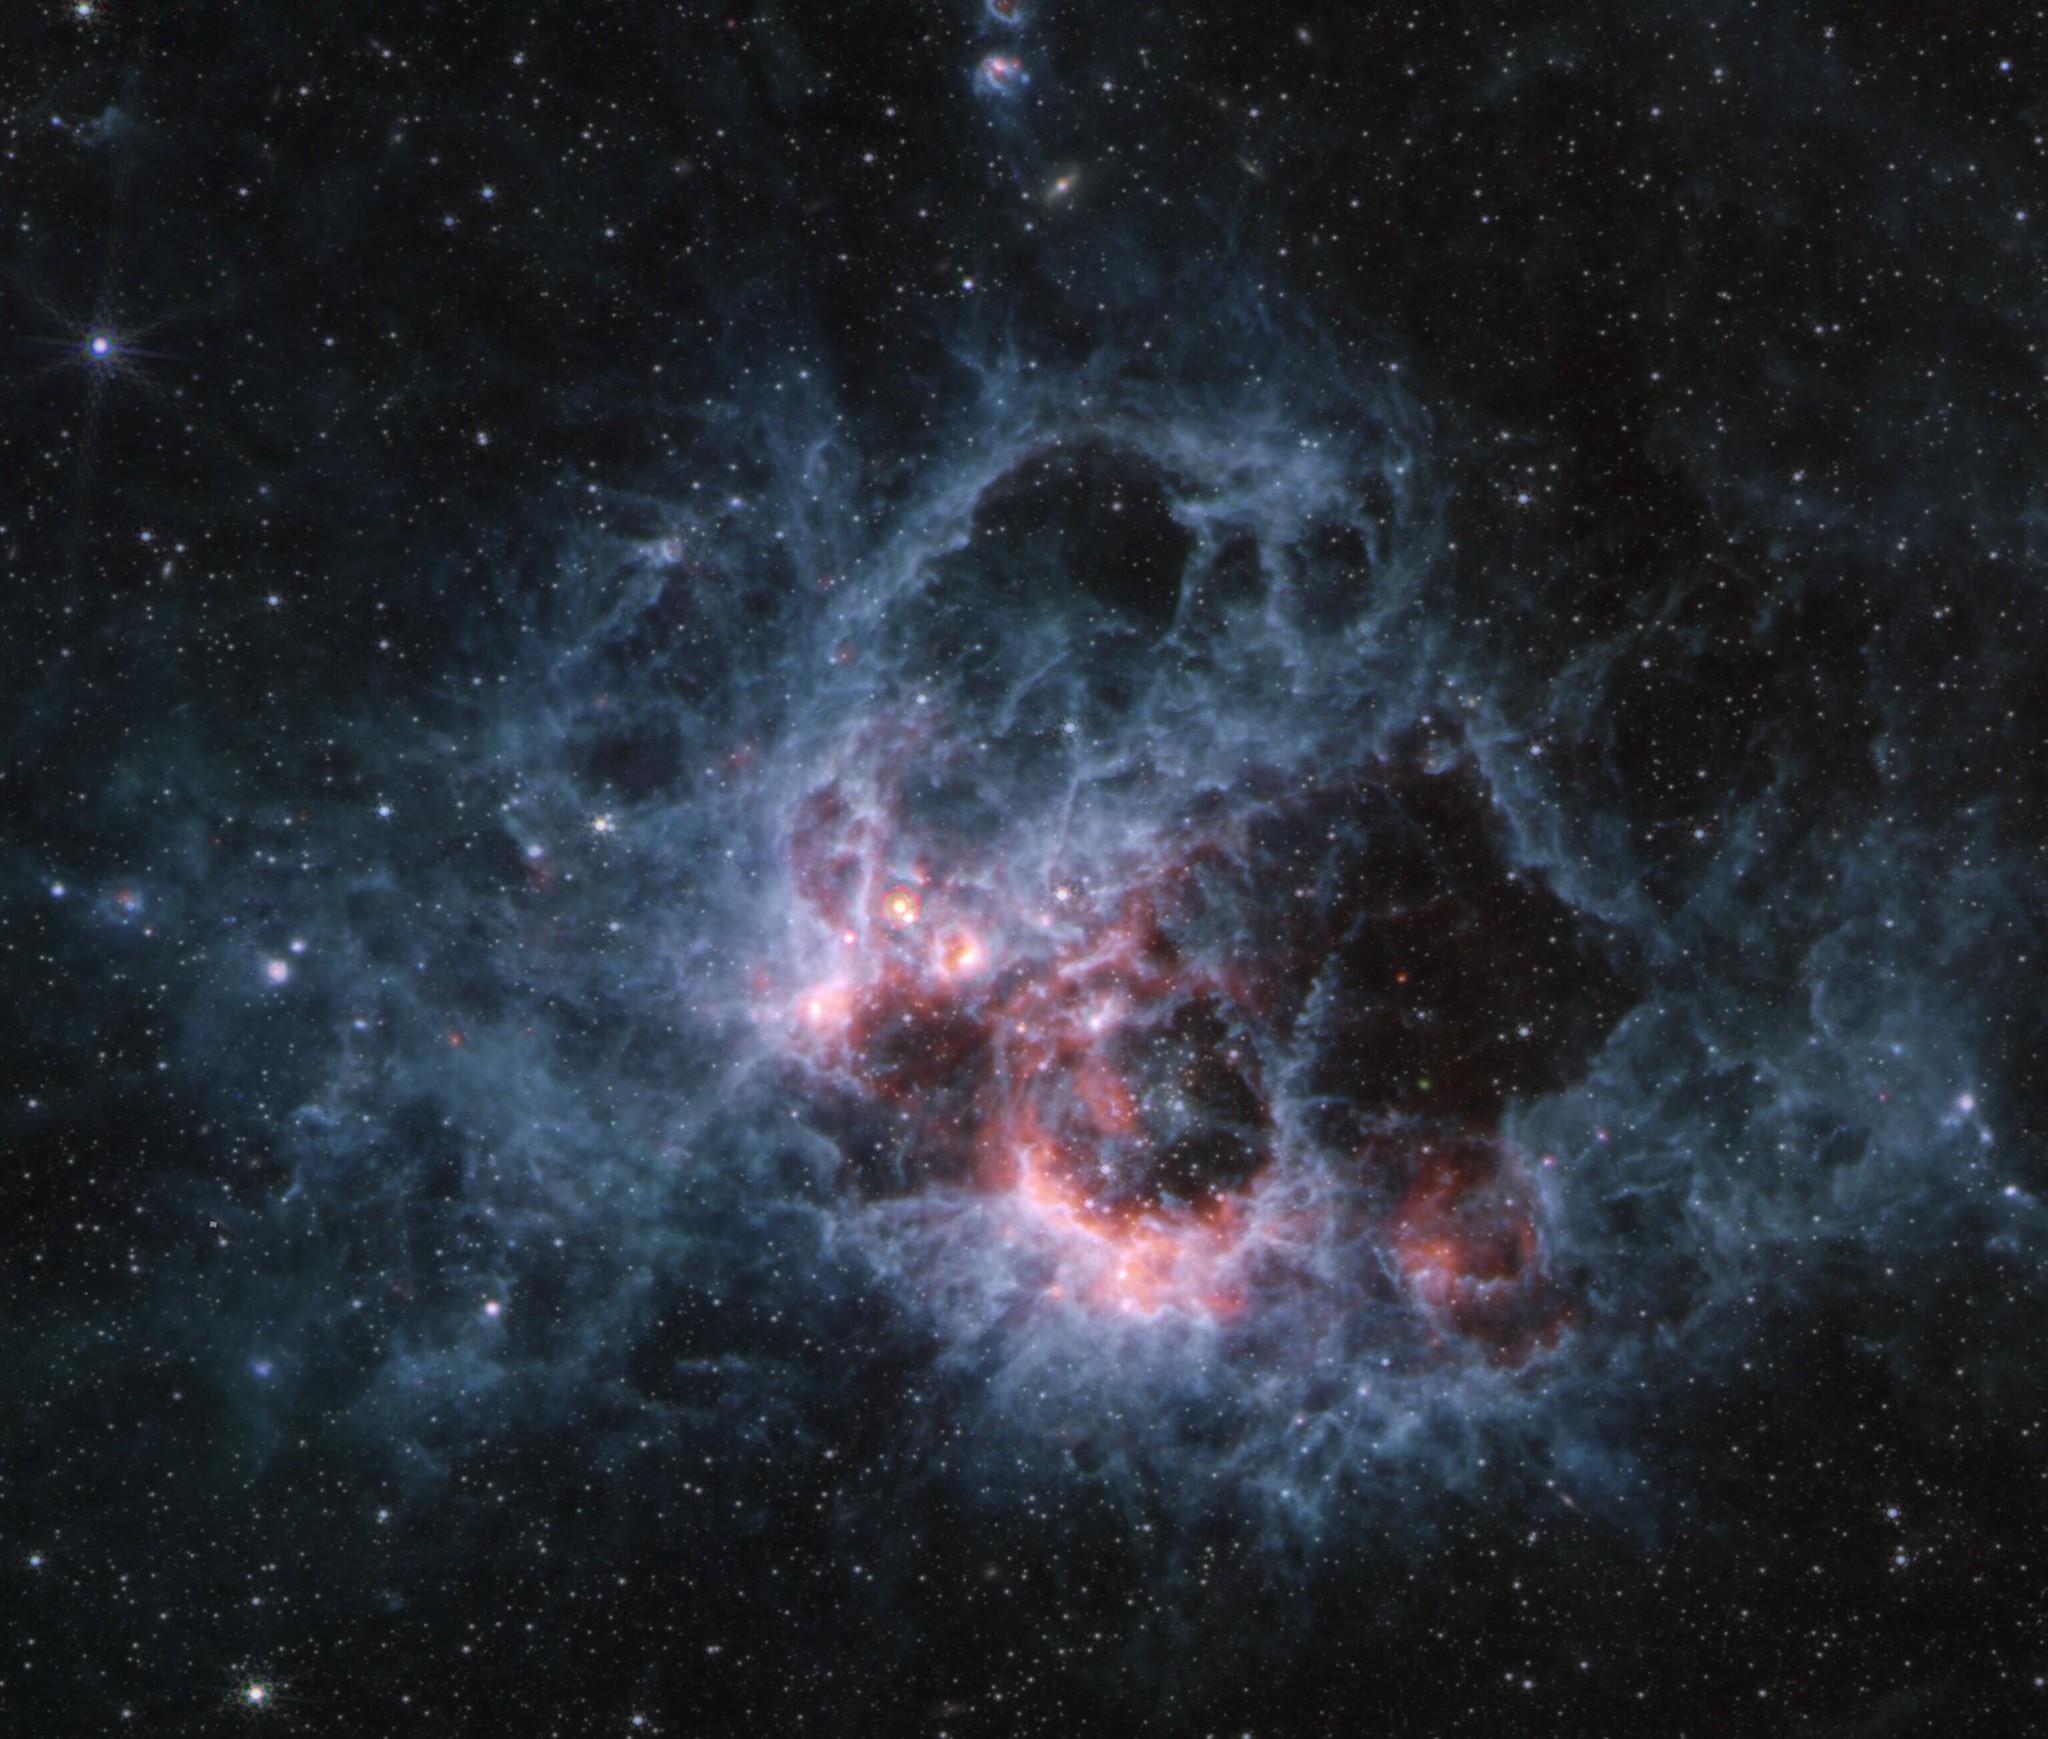 At the center of the image is a nebula on the black background of space. The nebula is comprised of wispy filaments of light blue clouds. At the center-right of the blue clouds is a large cavernous bubble. The bottom left edge of this cavernous bubble is filled with hues of pink and white gas. There are hundreds of dim stars that fill the surrounding area of the nebula.